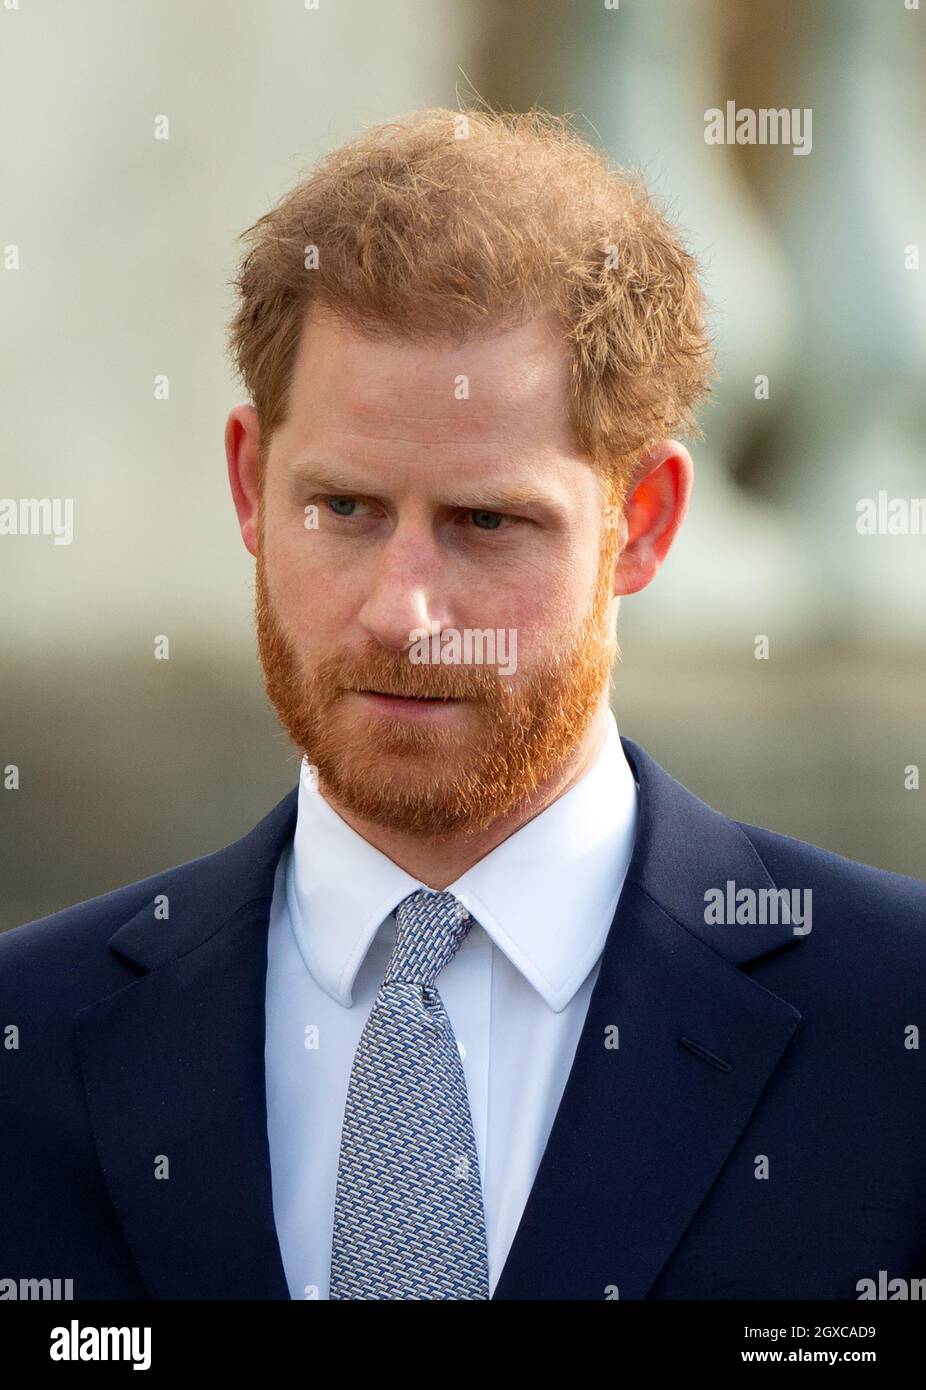 Prince Harry, Duke of Sussex, the Patron of the Rugby Football League, hosts the Rugby League World Cup 2021 draws at Buckingham Palace in London on January 16, 2020. Stock Photo